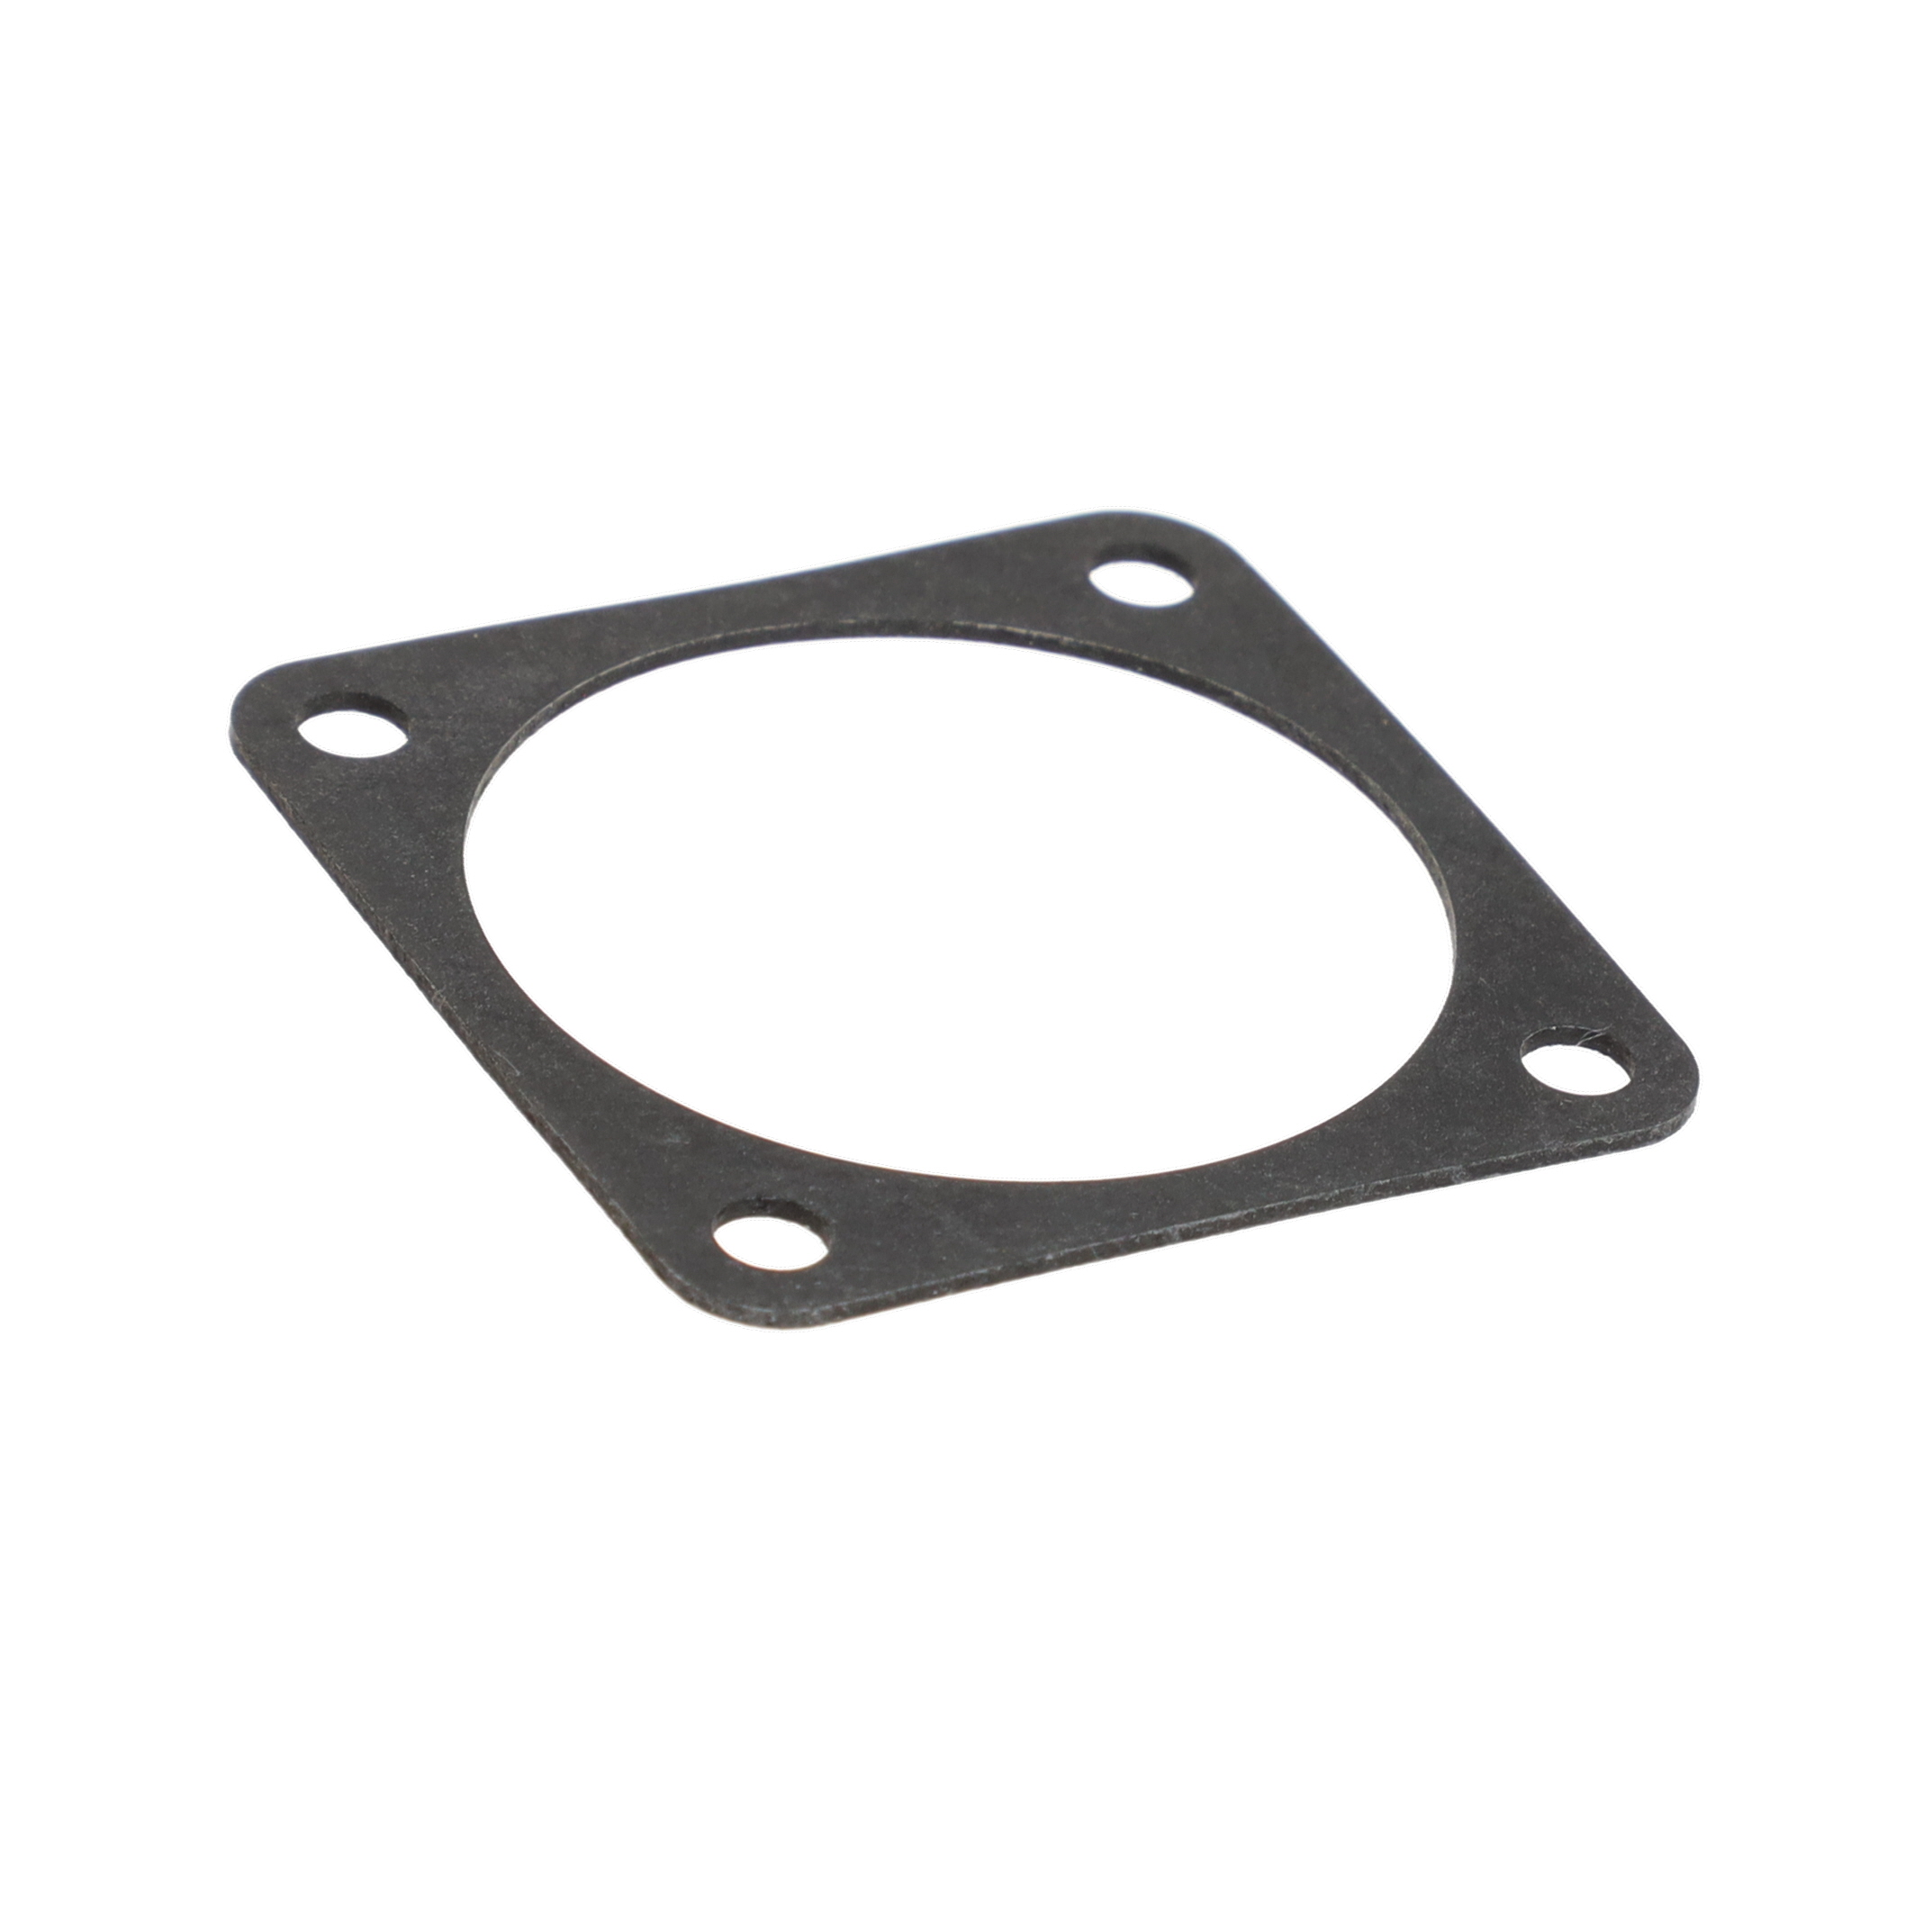 【075-8519-000】CONN GASKET FOR 24